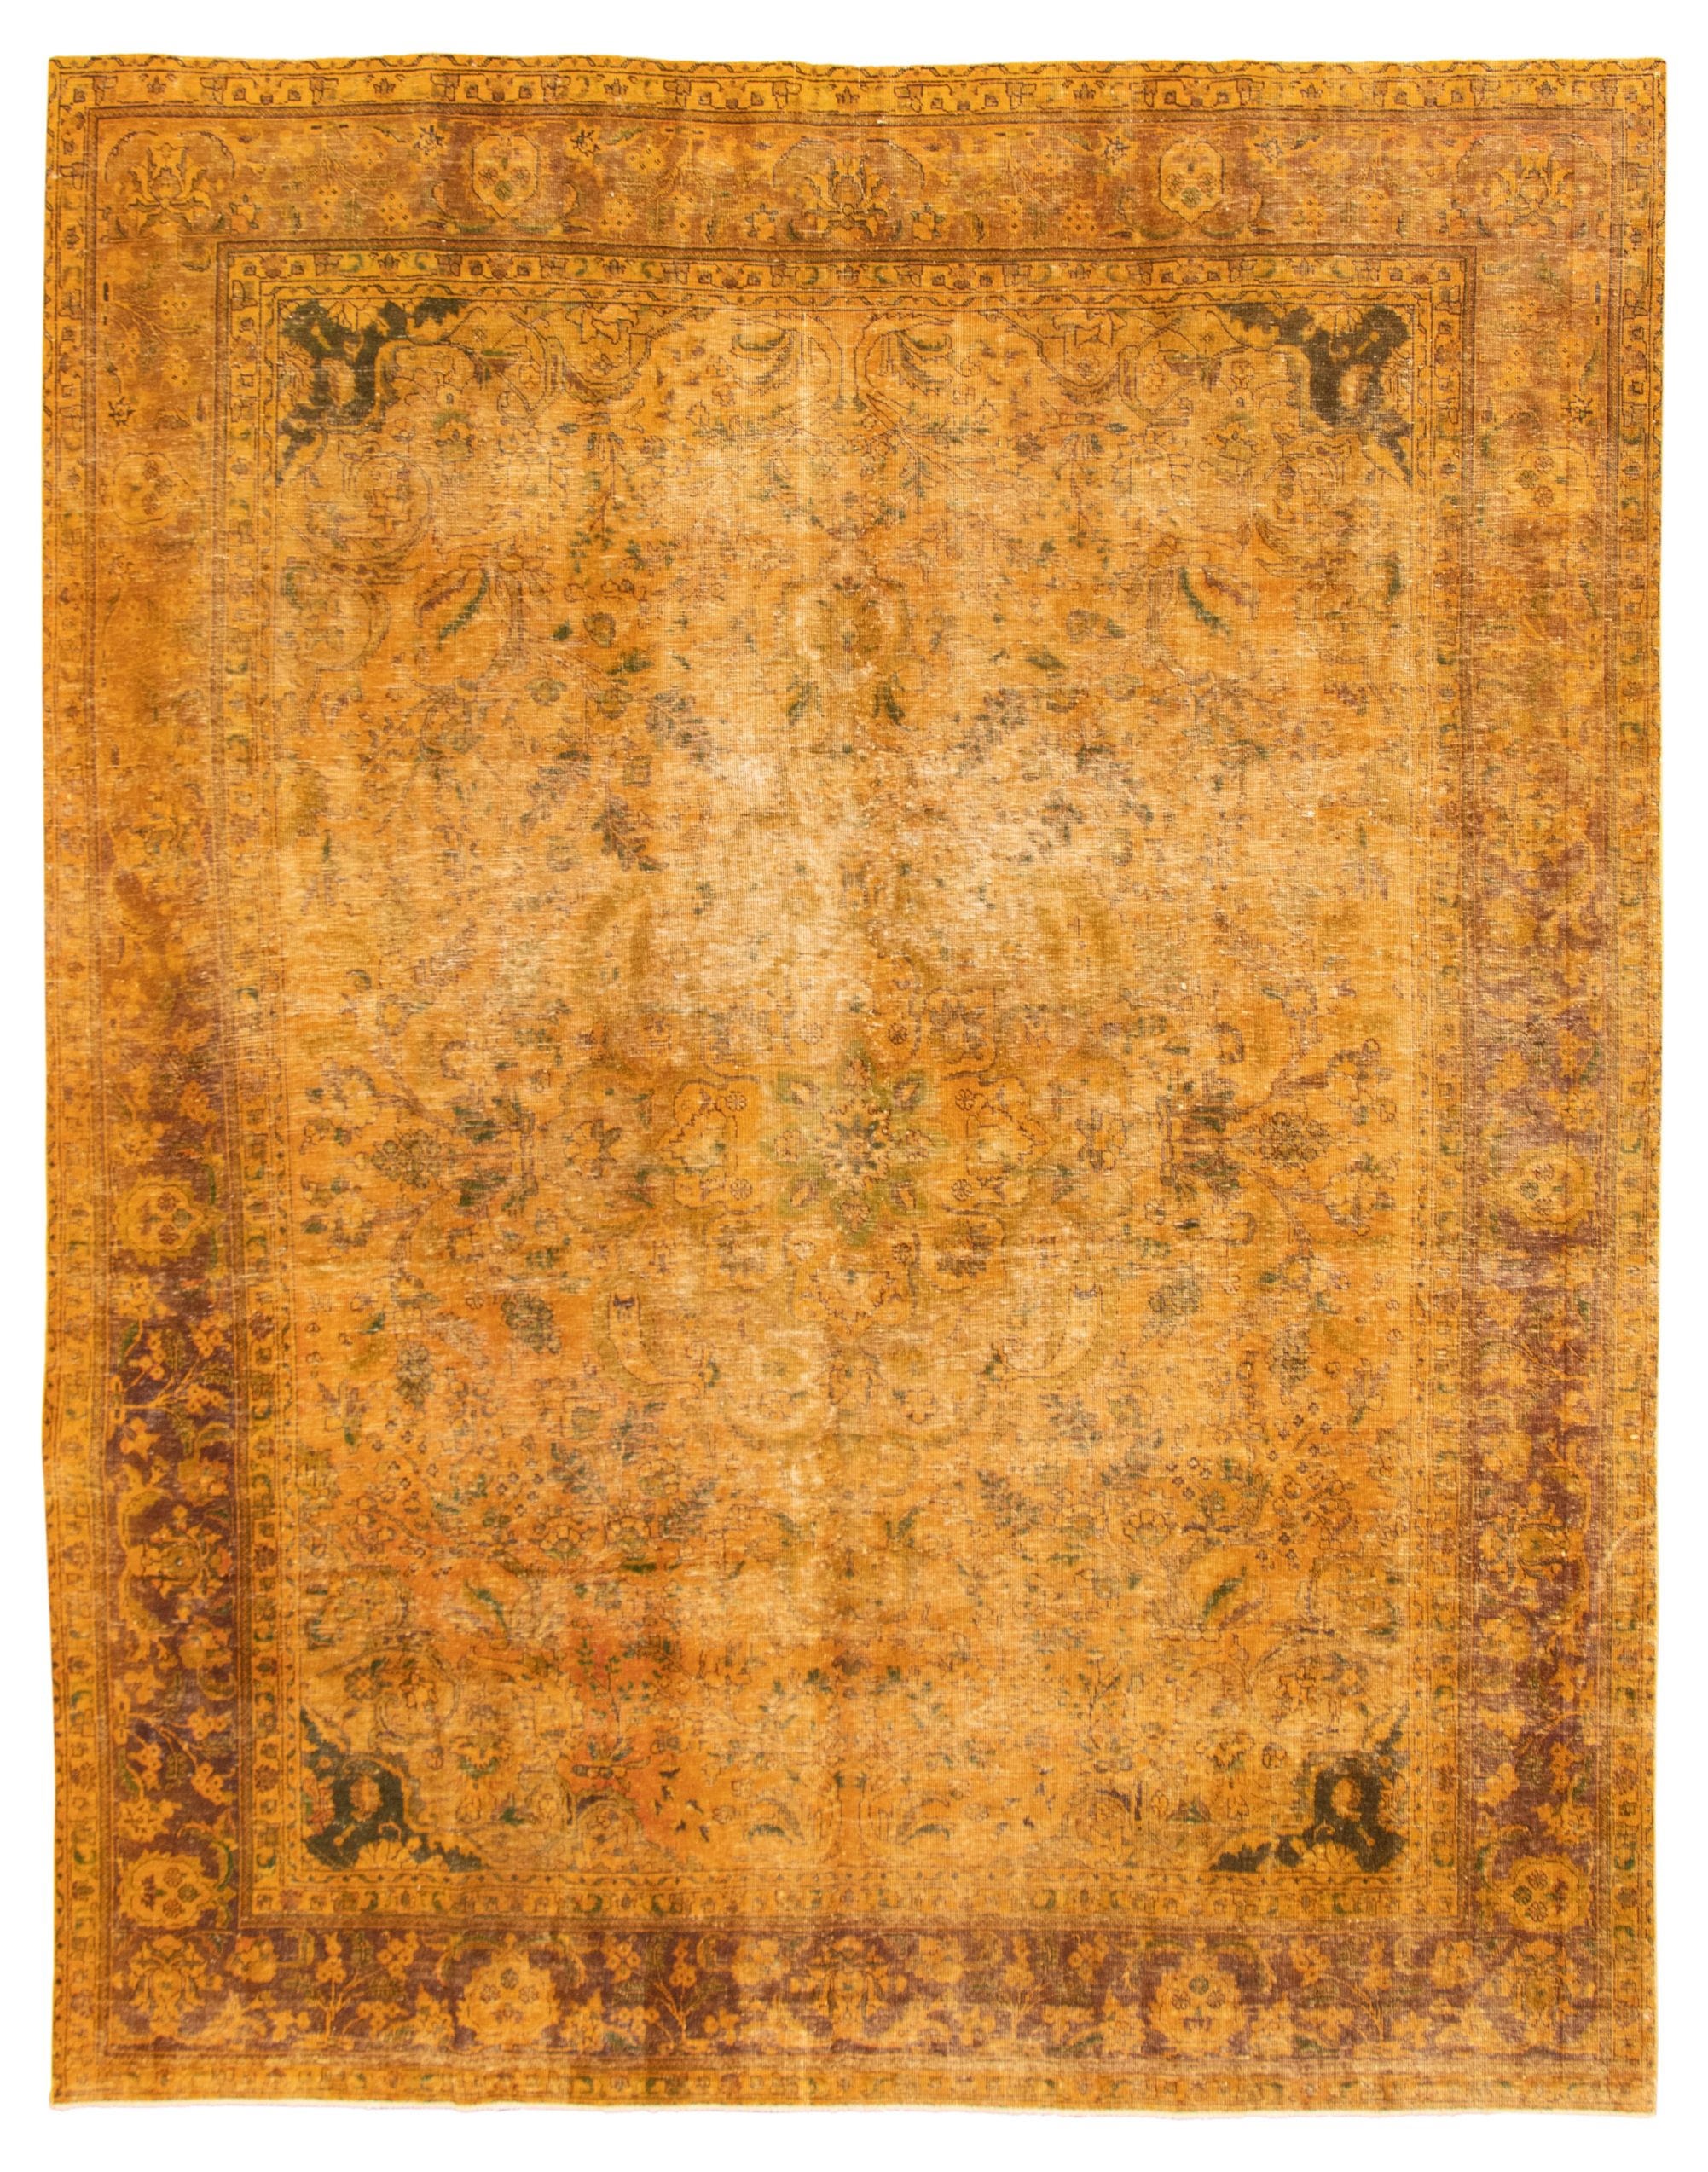 Hand-knotted Color Transition Dark Gold Wool Rug 9'10" x 12'6" Size: 9'10" x 12'6"  